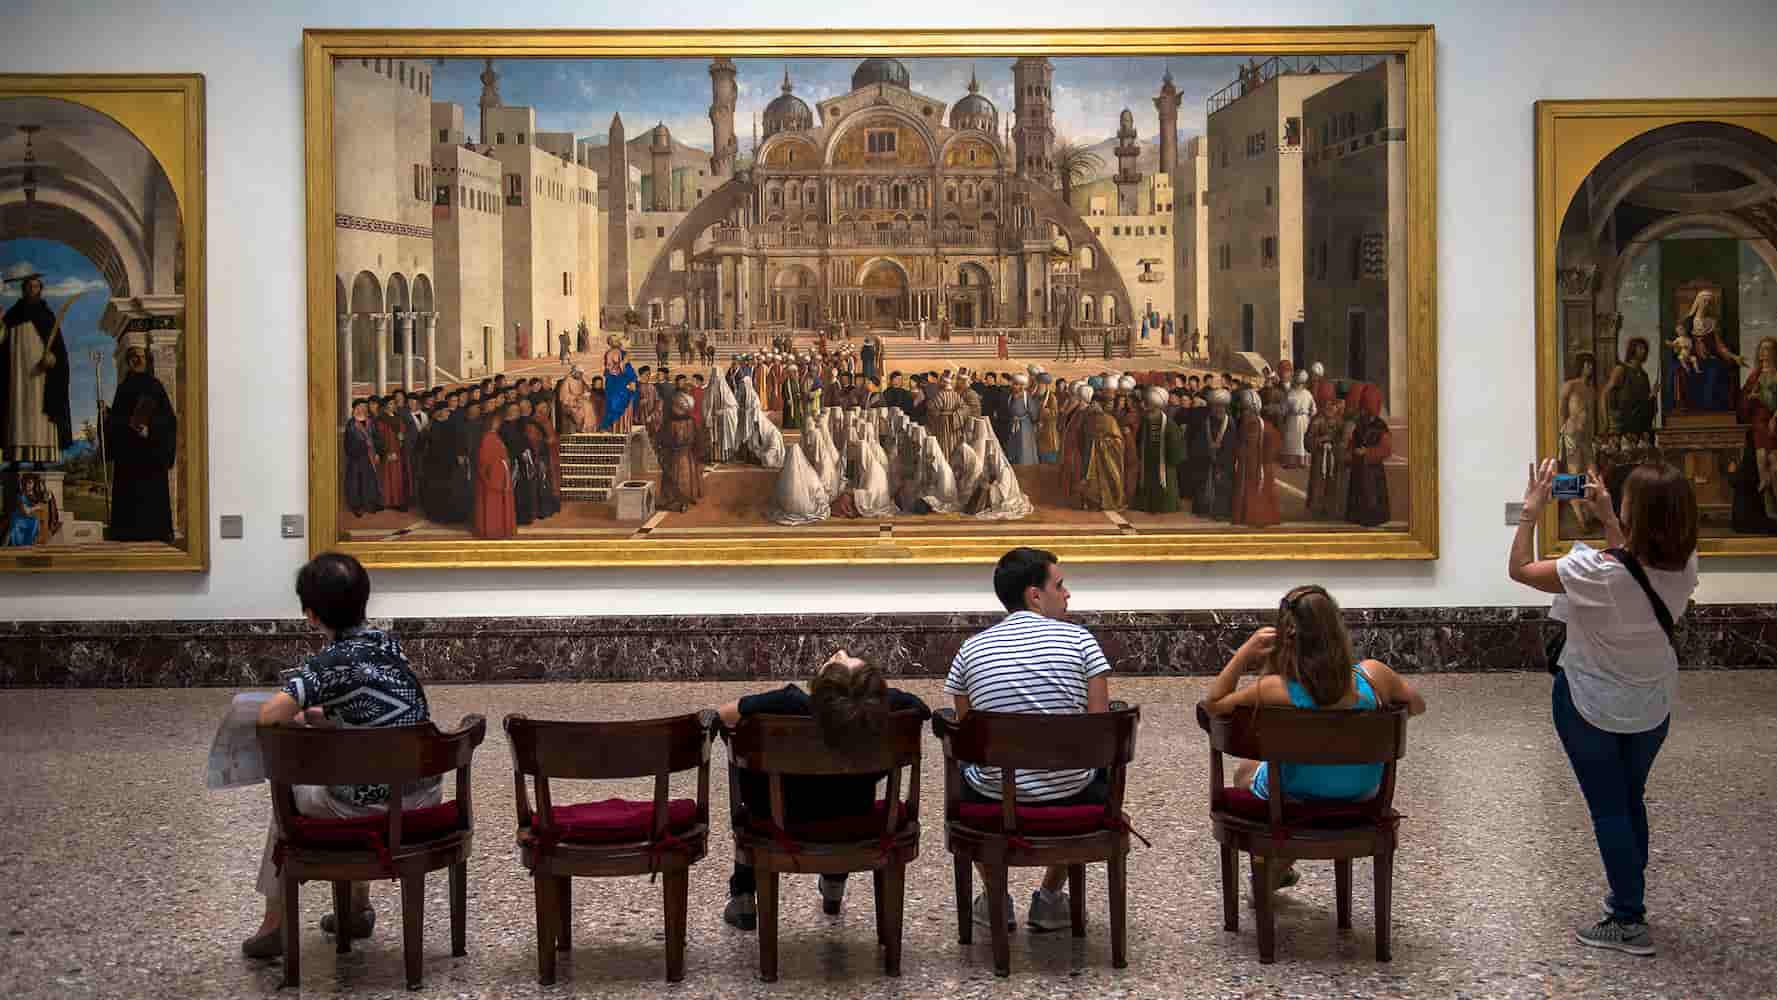 6 amazing Italian art museums you must see